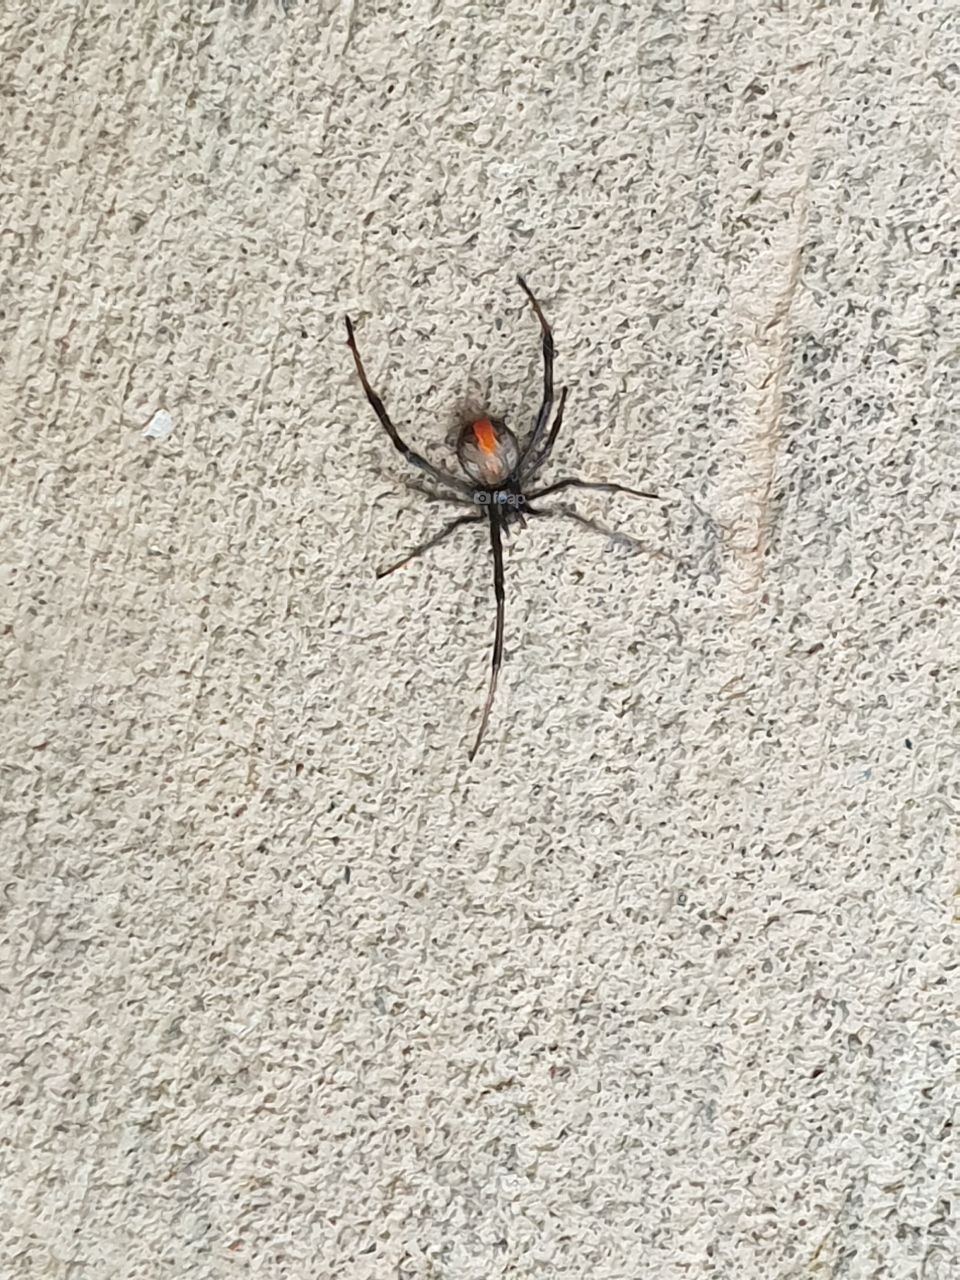 redback spider on the prowl